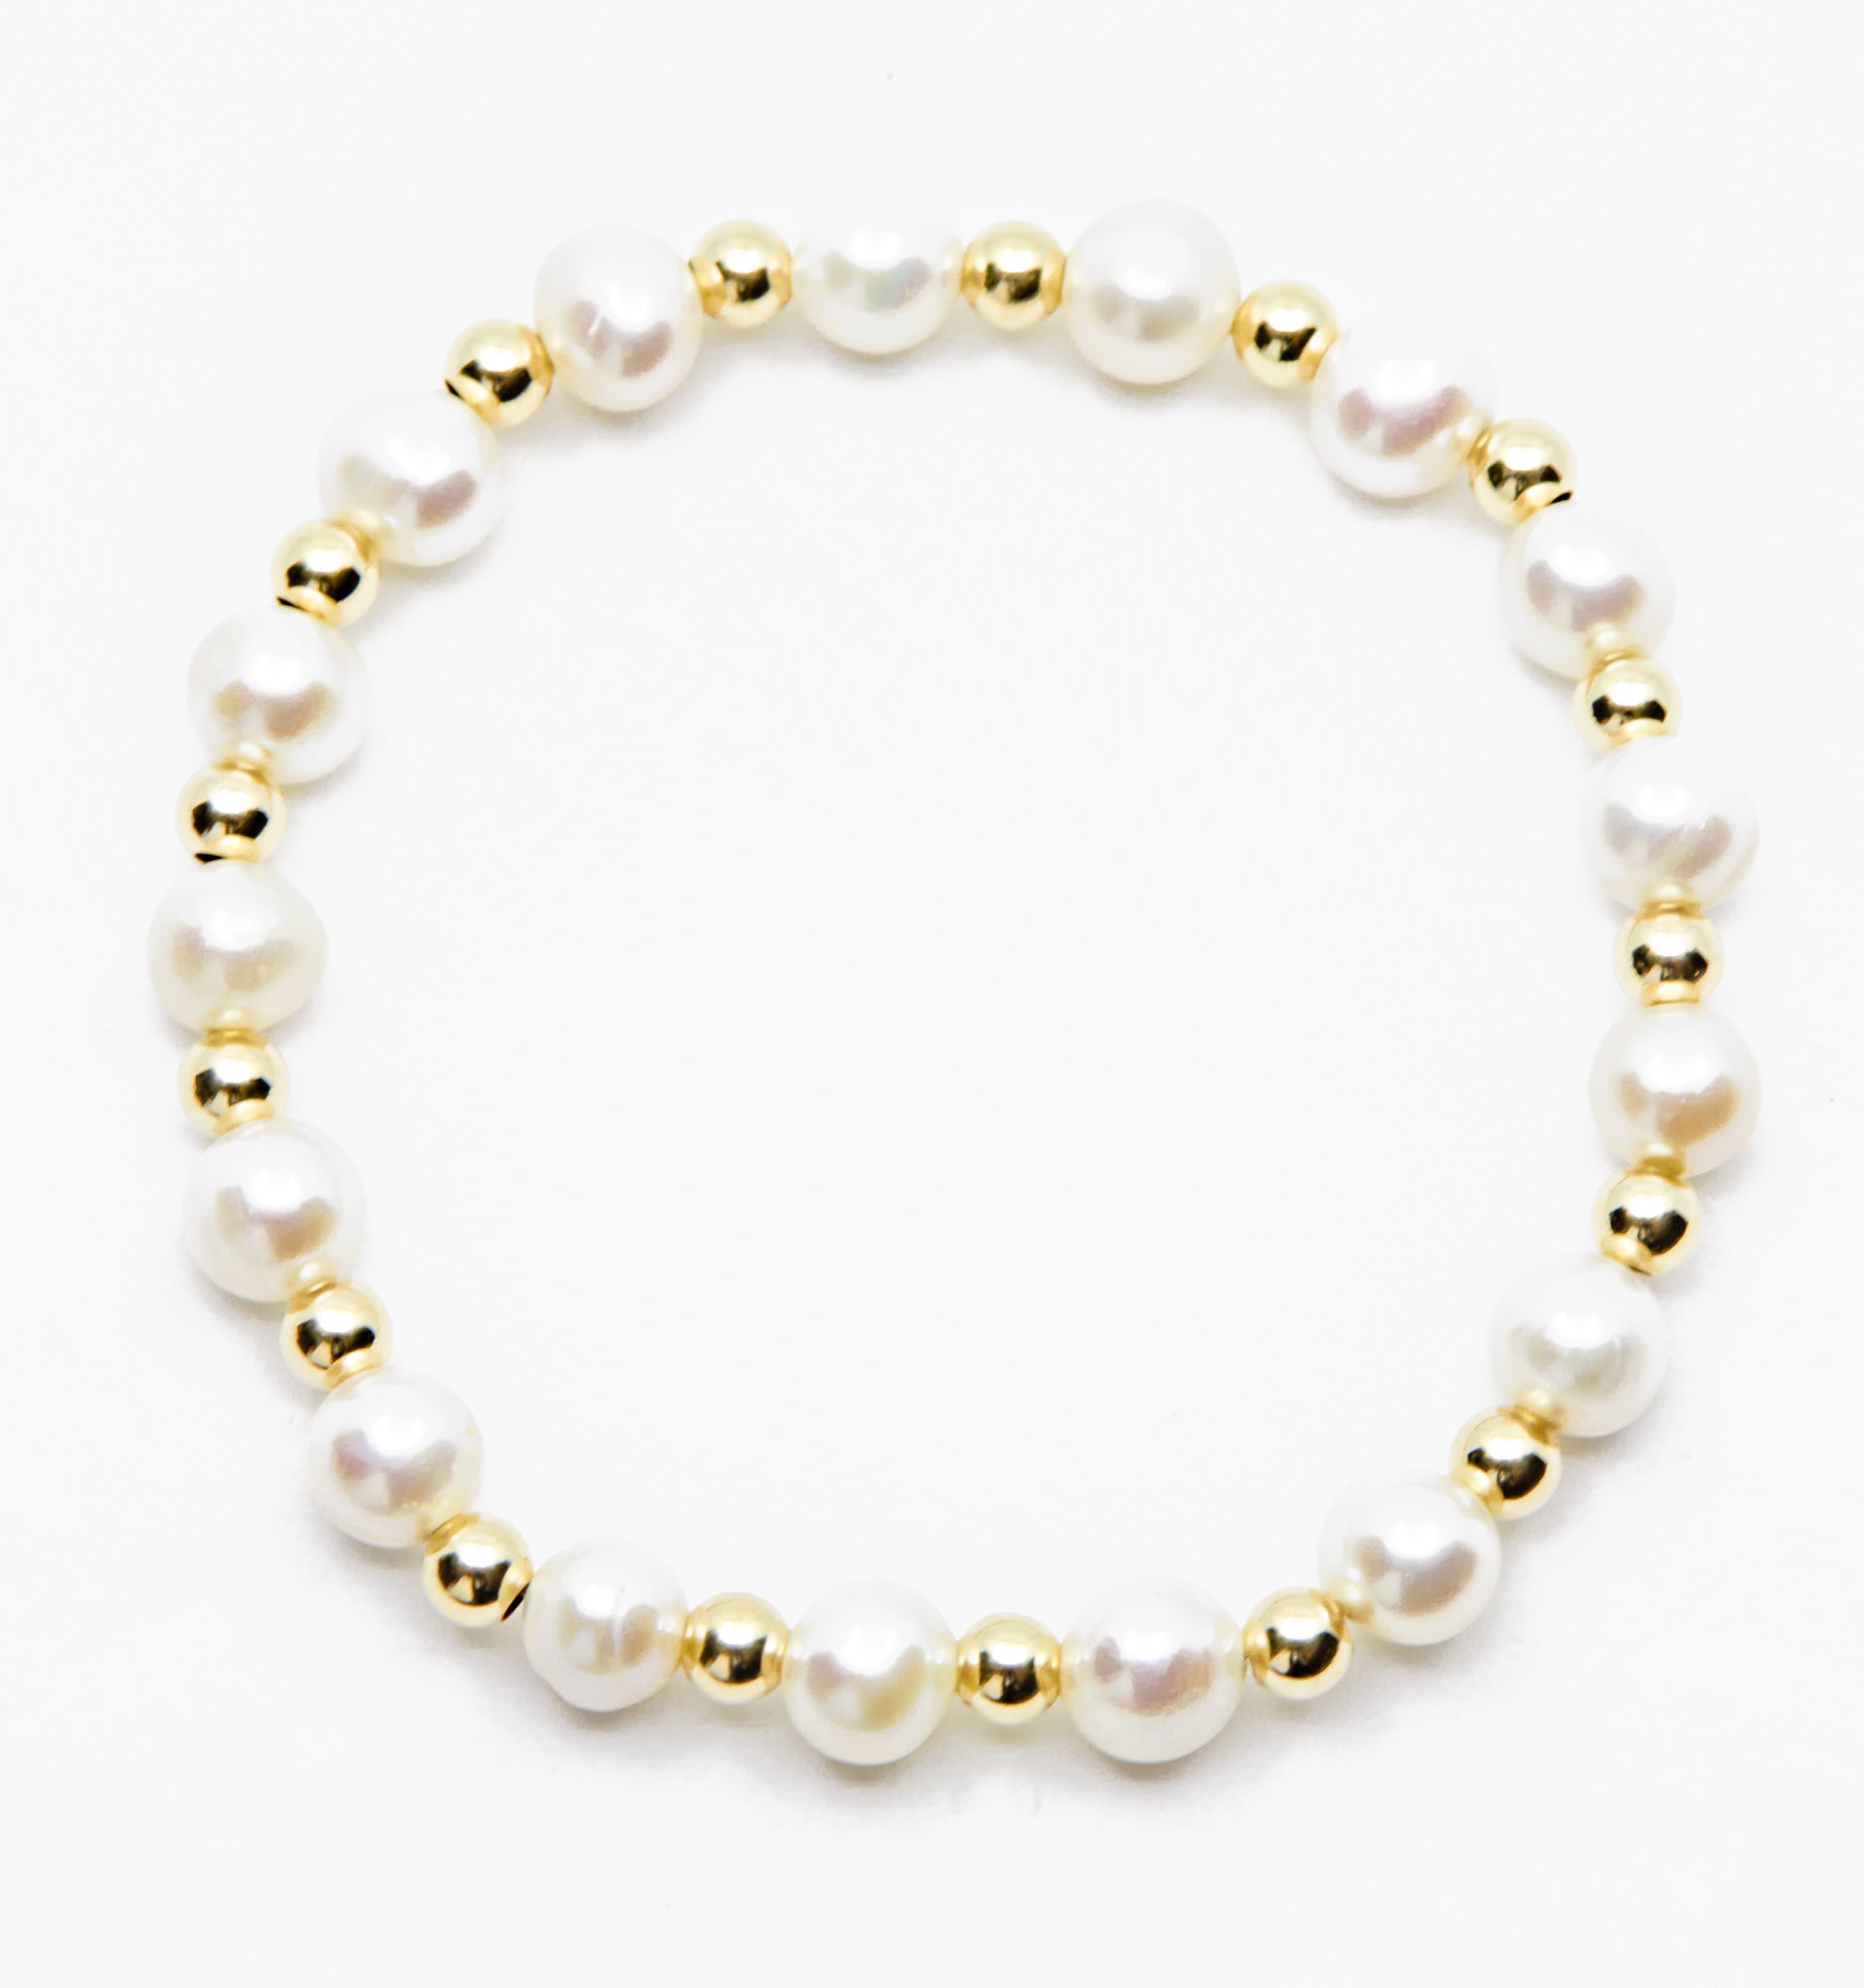 14K Gold Cultured Freshwater Pearl Necklace, Bracelet and Earrings Set -  22893200 | HSN